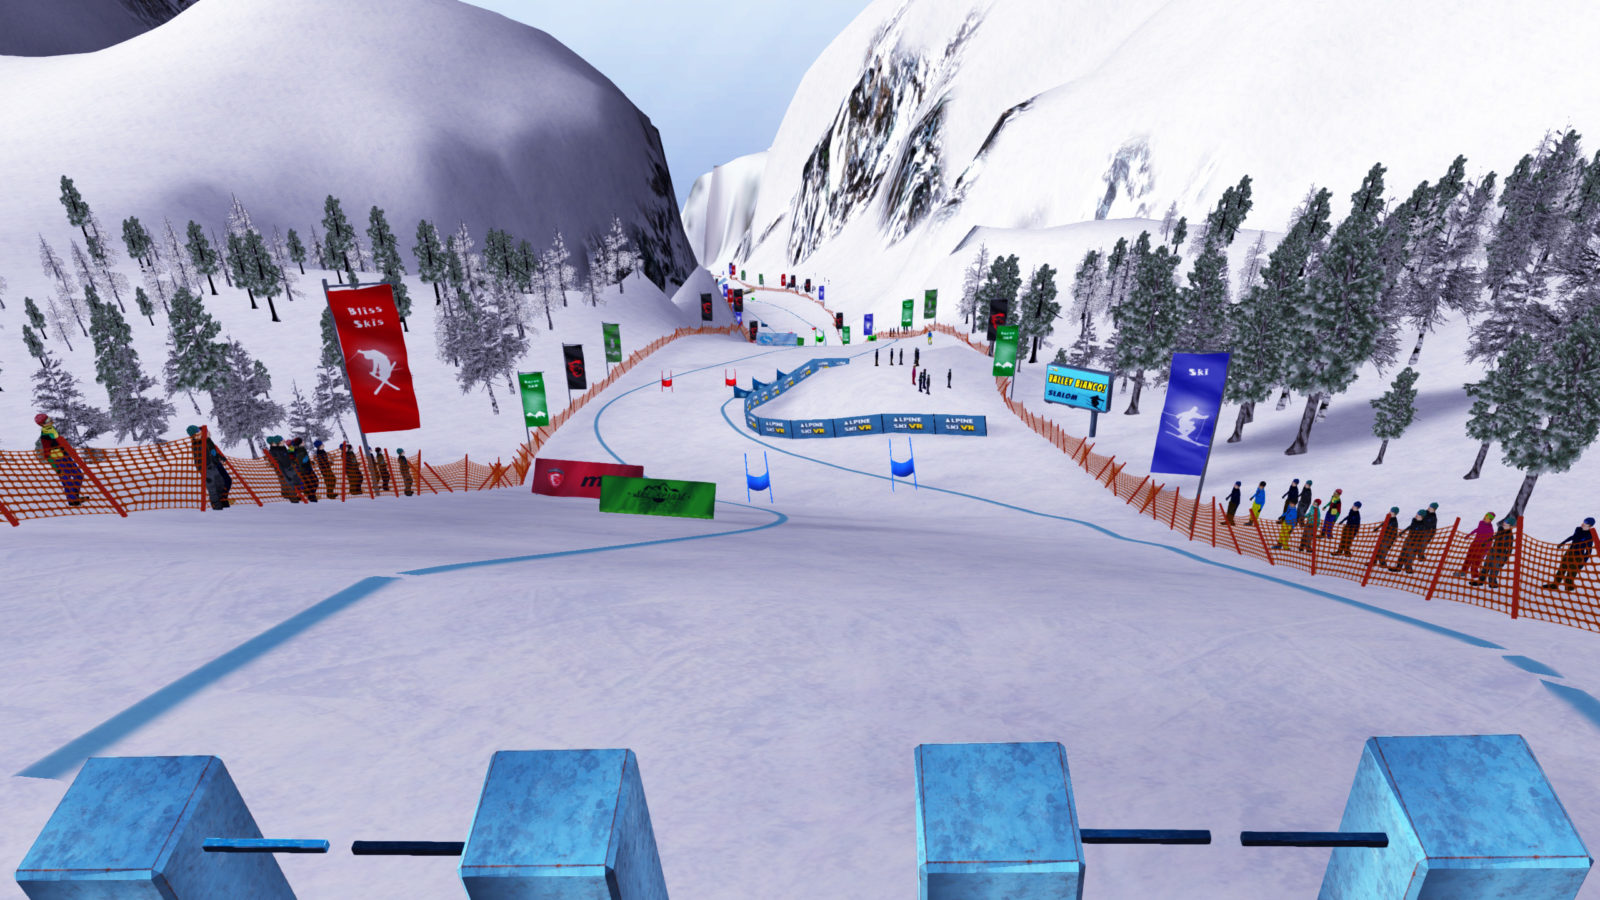 The 2018 Winter Olympics Event Experience